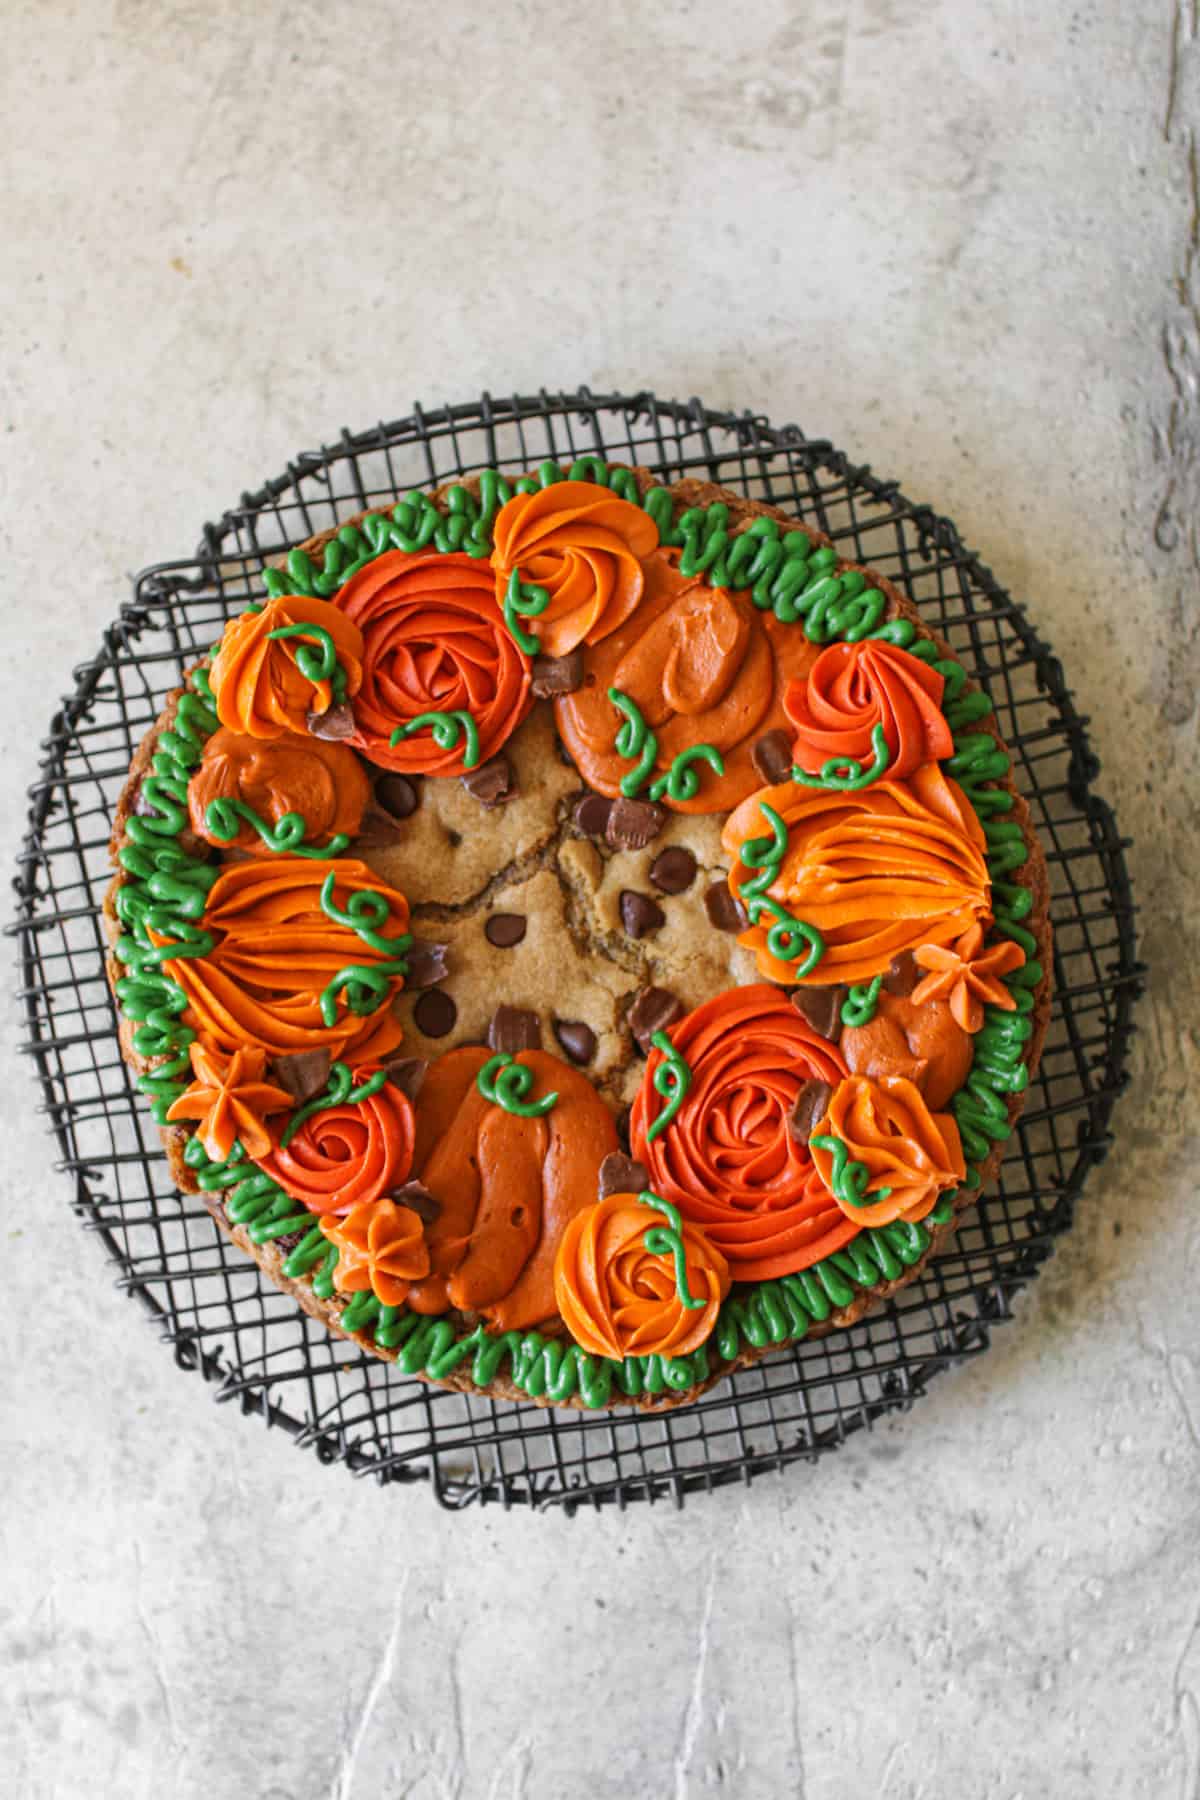 Overhead of Fall Cookie Cake with decorate buttercream pumpkins on a black wire trivet. The trivet sits on a cement background.